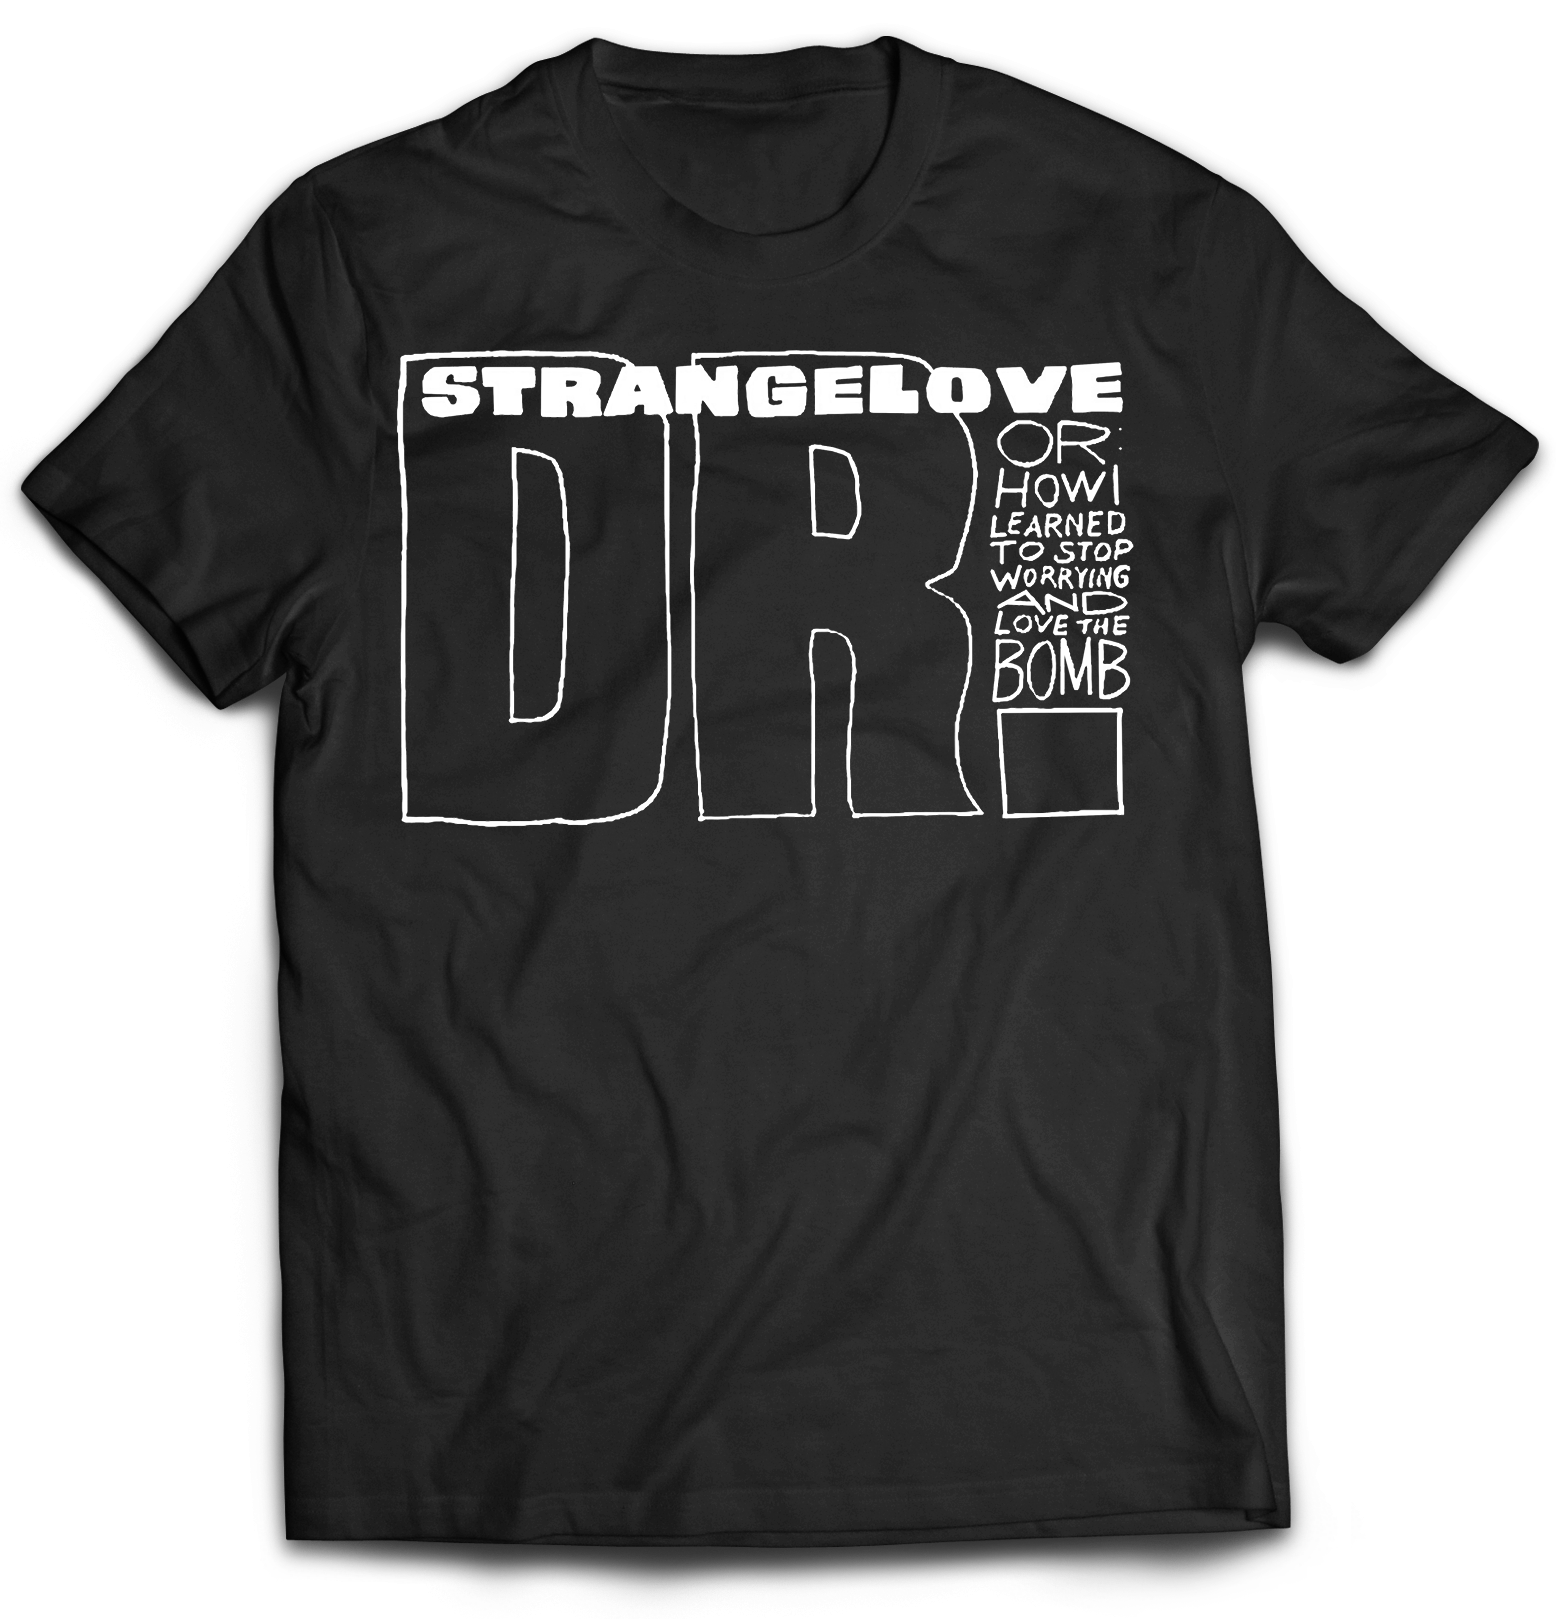 DR. STRANGELOVE, OR:  HOW I LEARNED TO STOP WORRYING AND LOVE THE BOMB - TITLE TREATMENT BLACK T-SHIRT